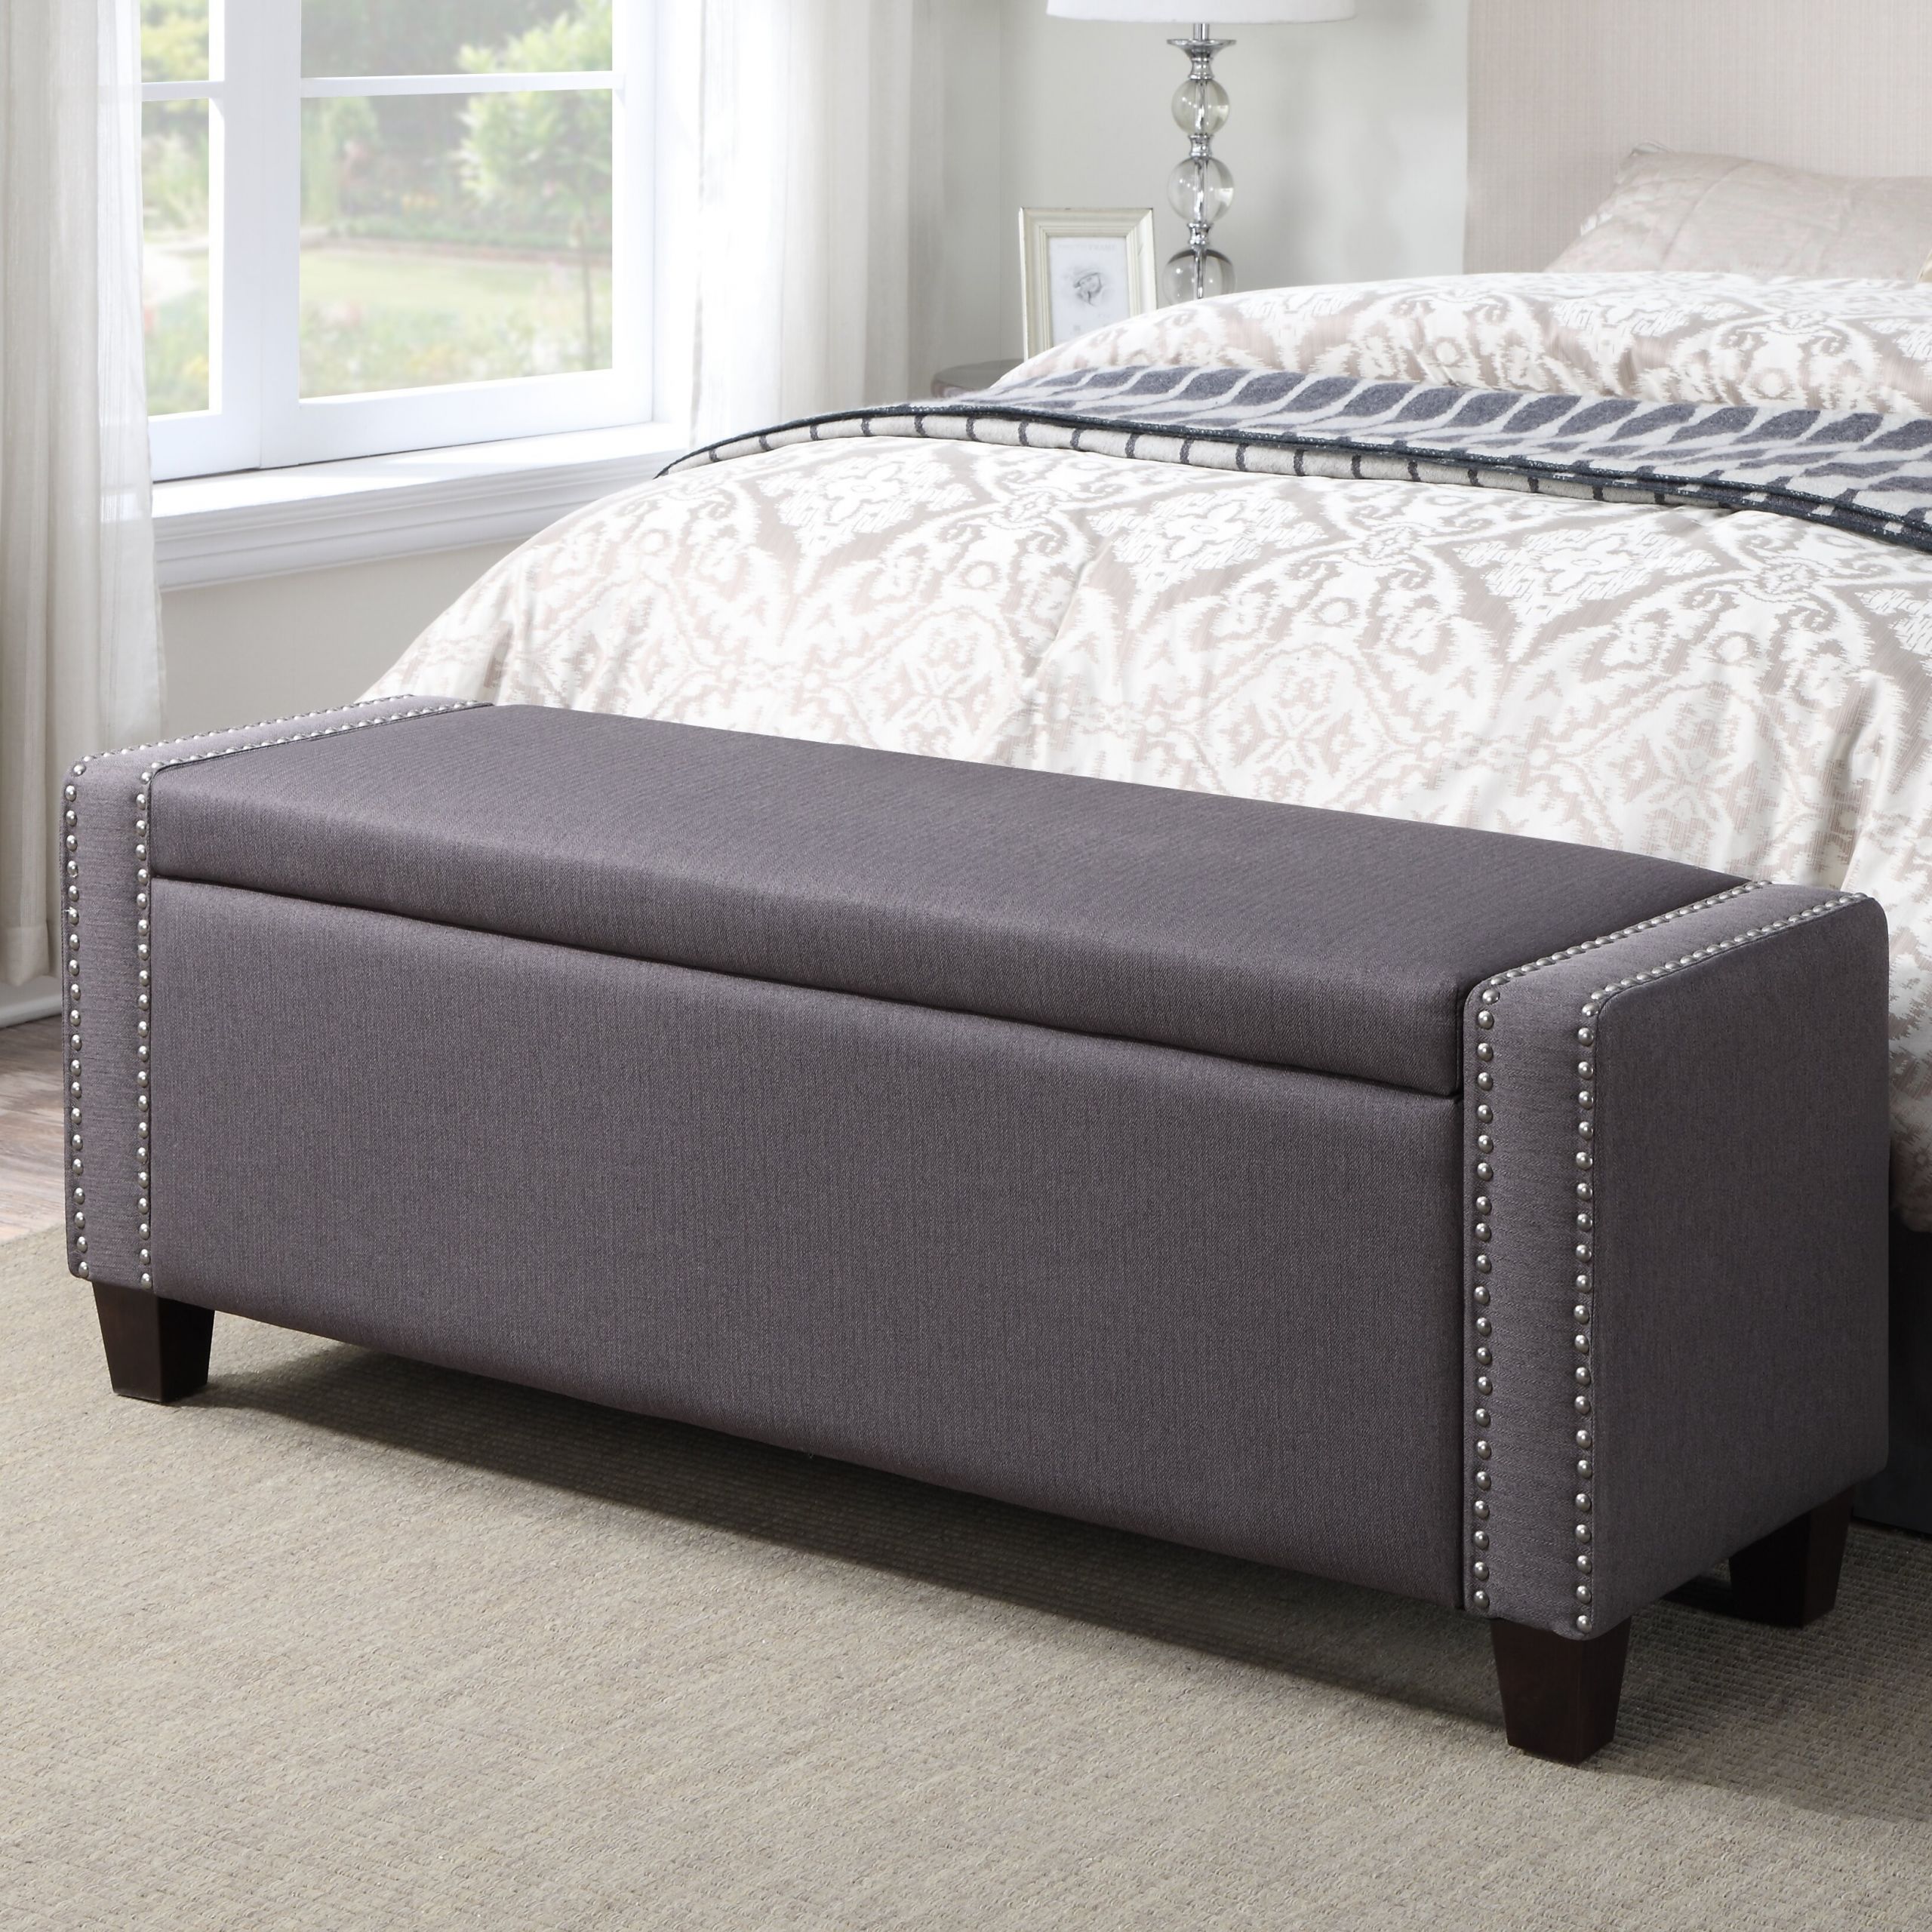 Storage Bed Benches
 House of Hampton Gistel Upholstered Storage Bedroom Bench